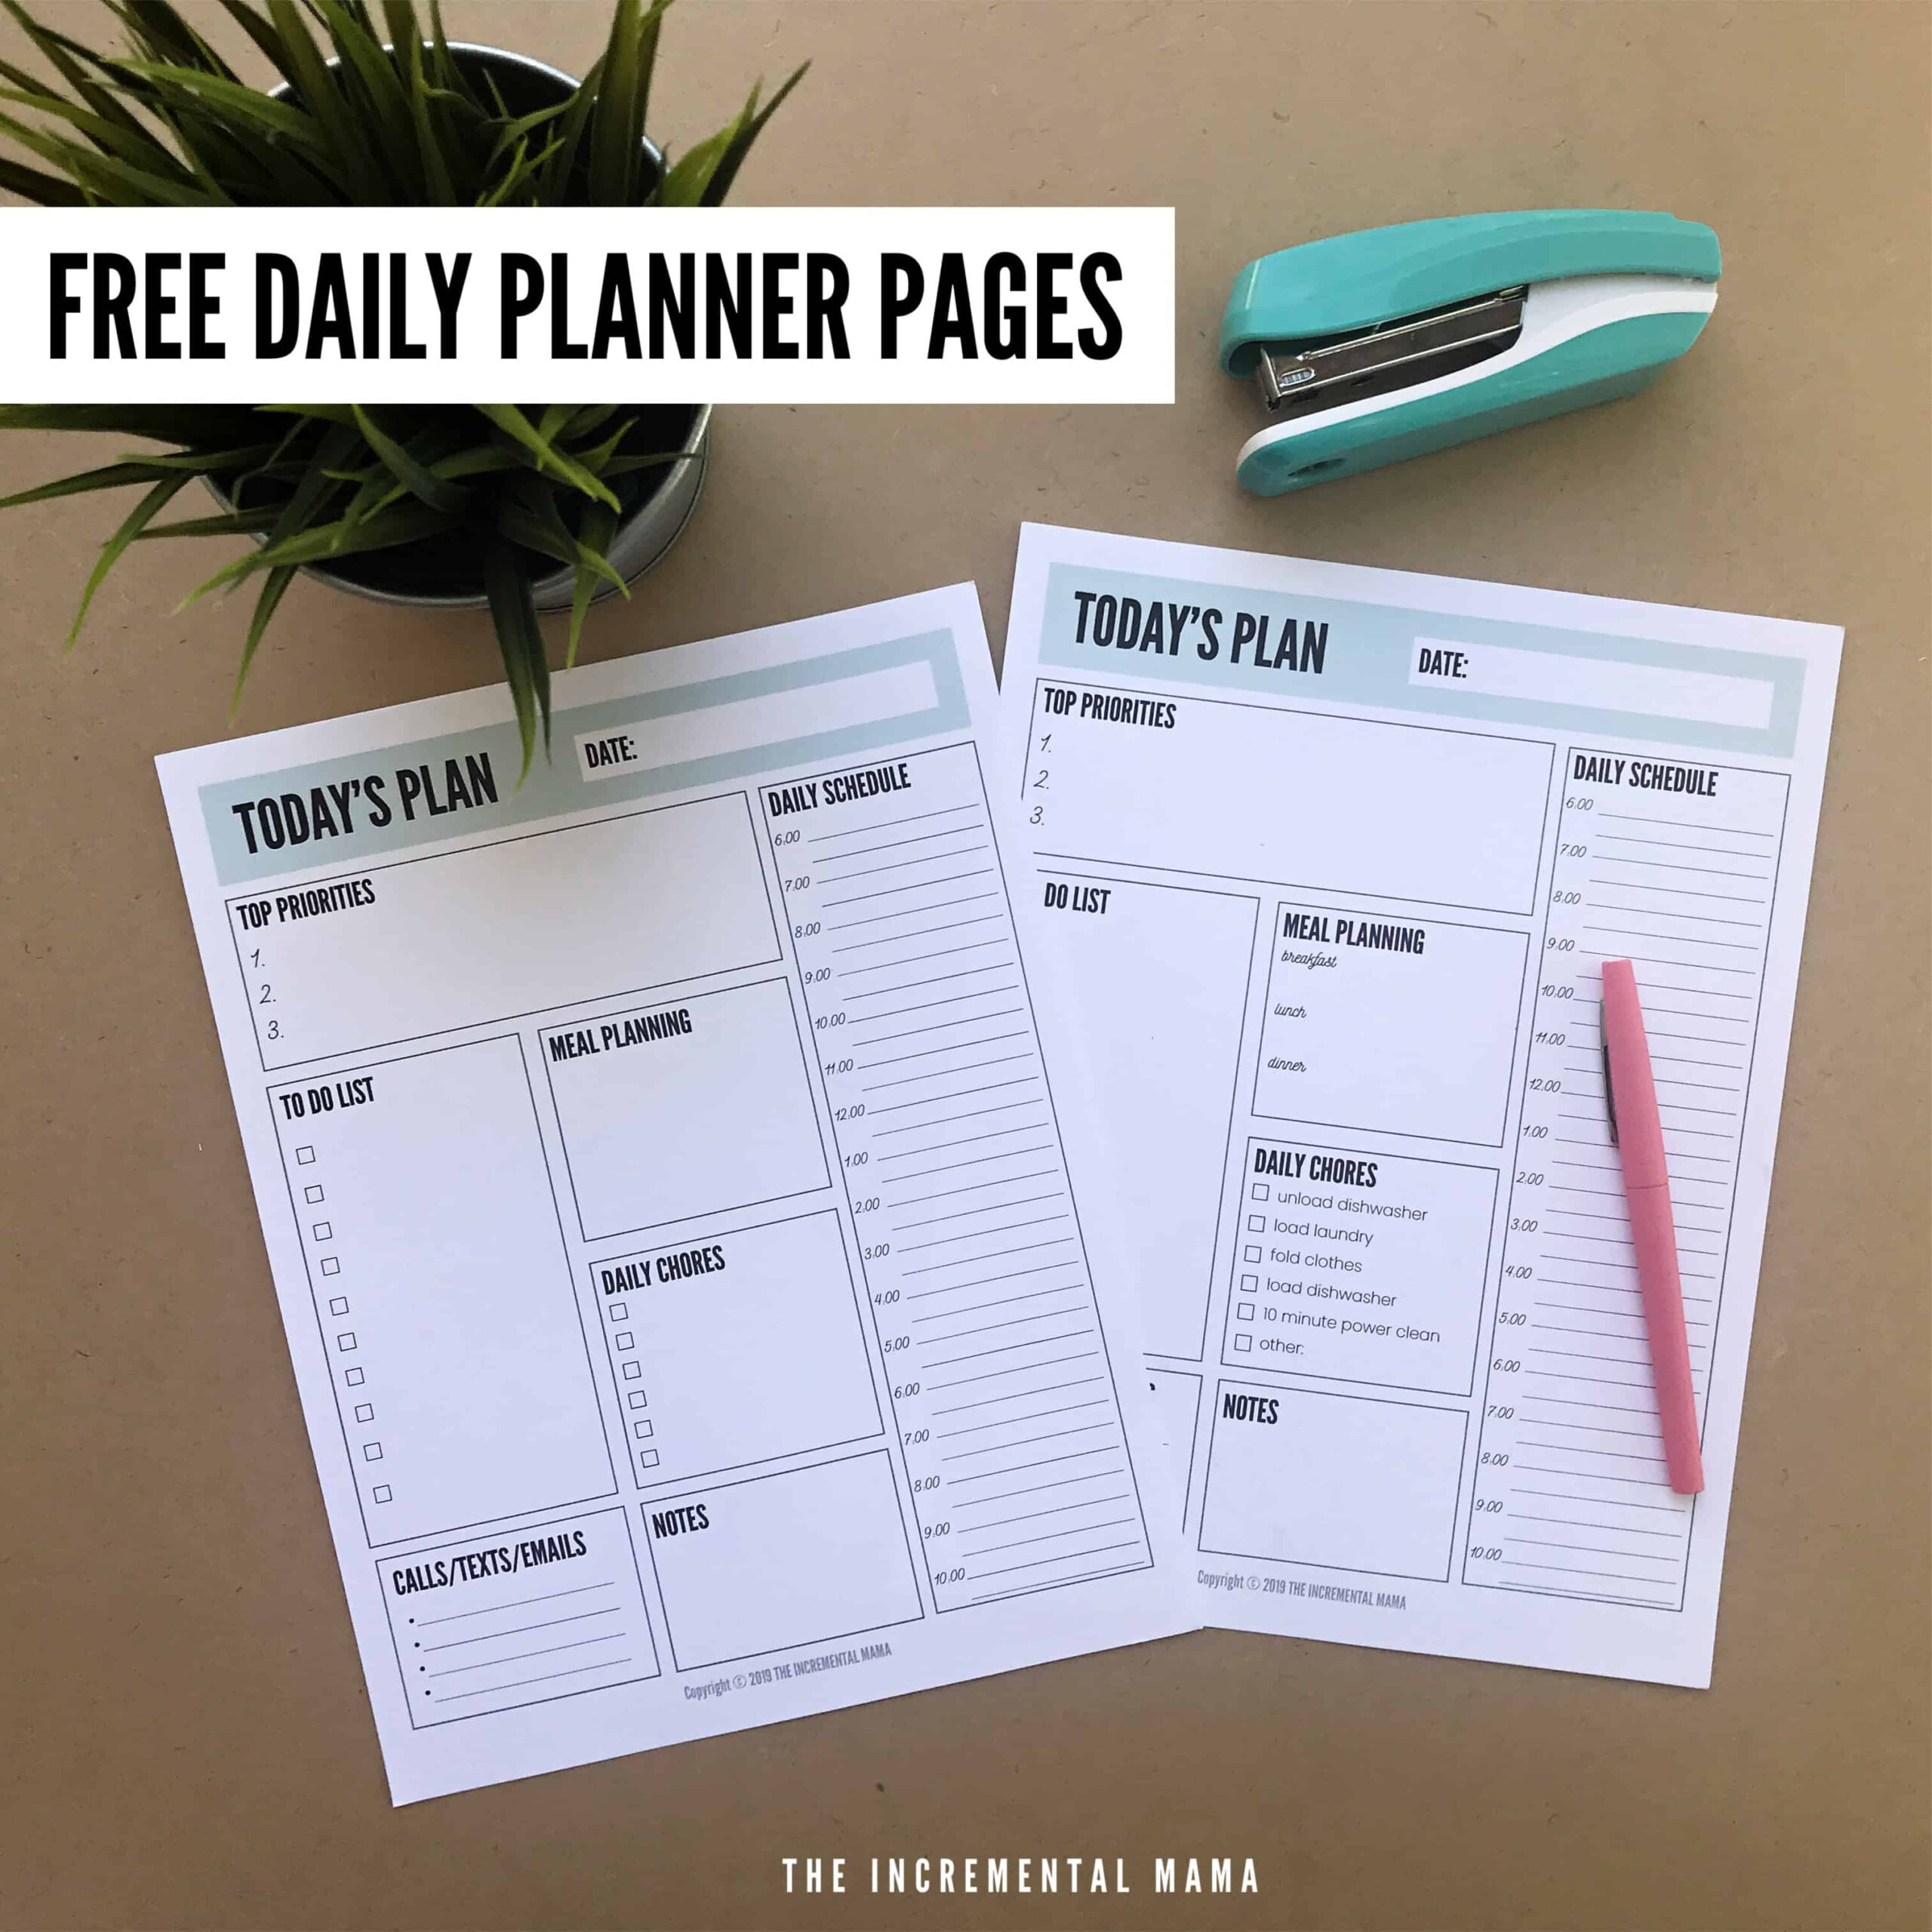 Free Printable Daily Planner Template  The Incremental Mama regarding Free Printable Daily Calendar With Time Slots